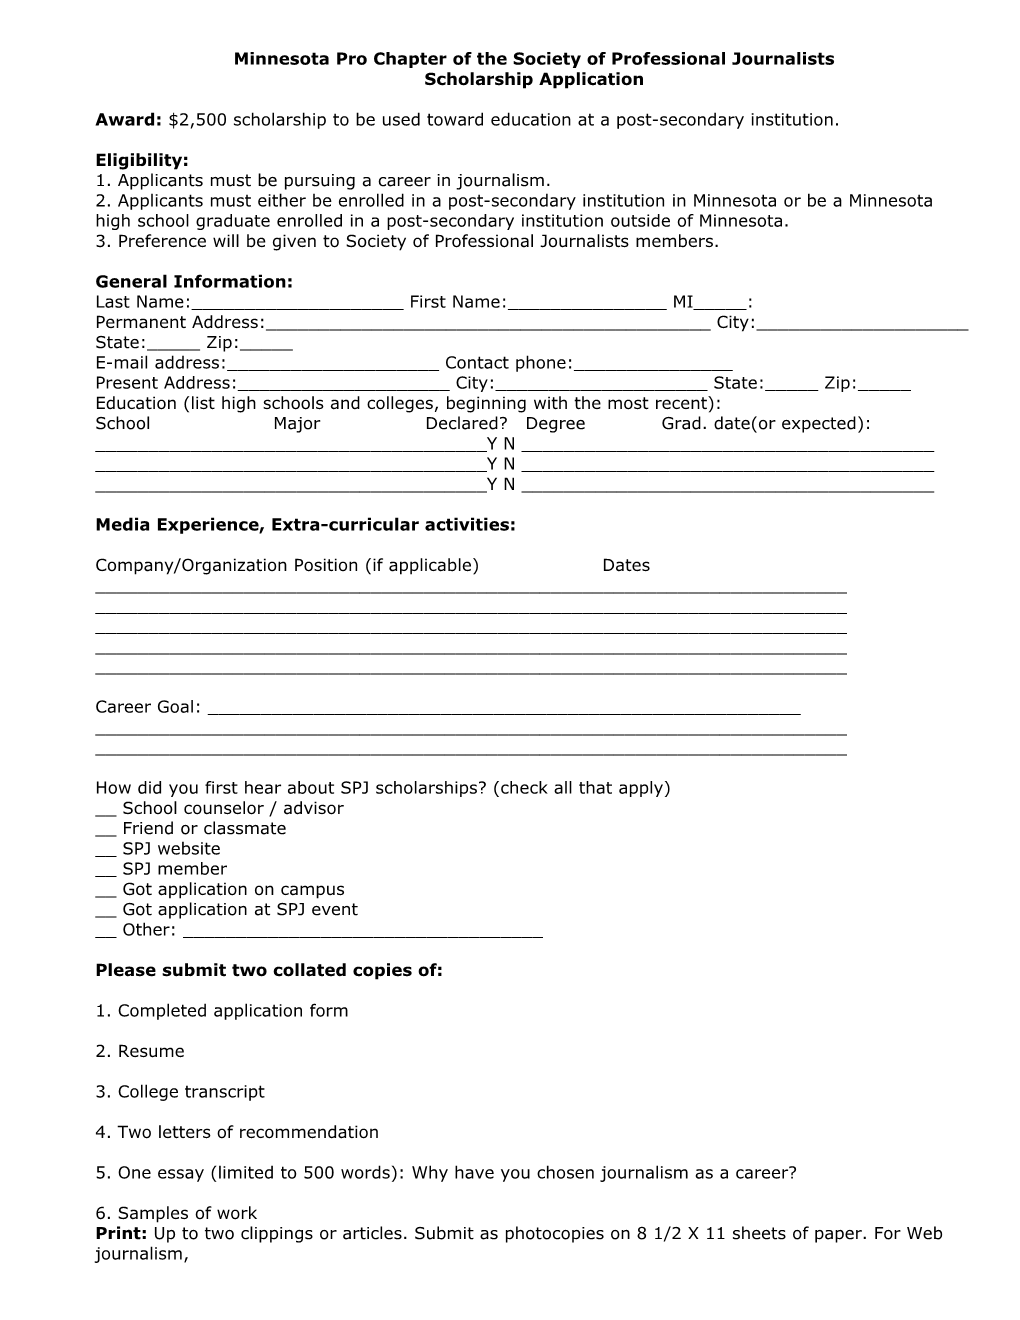 Minnesota Pro Chapter of the Society of Professional Journalists Scholarship Application